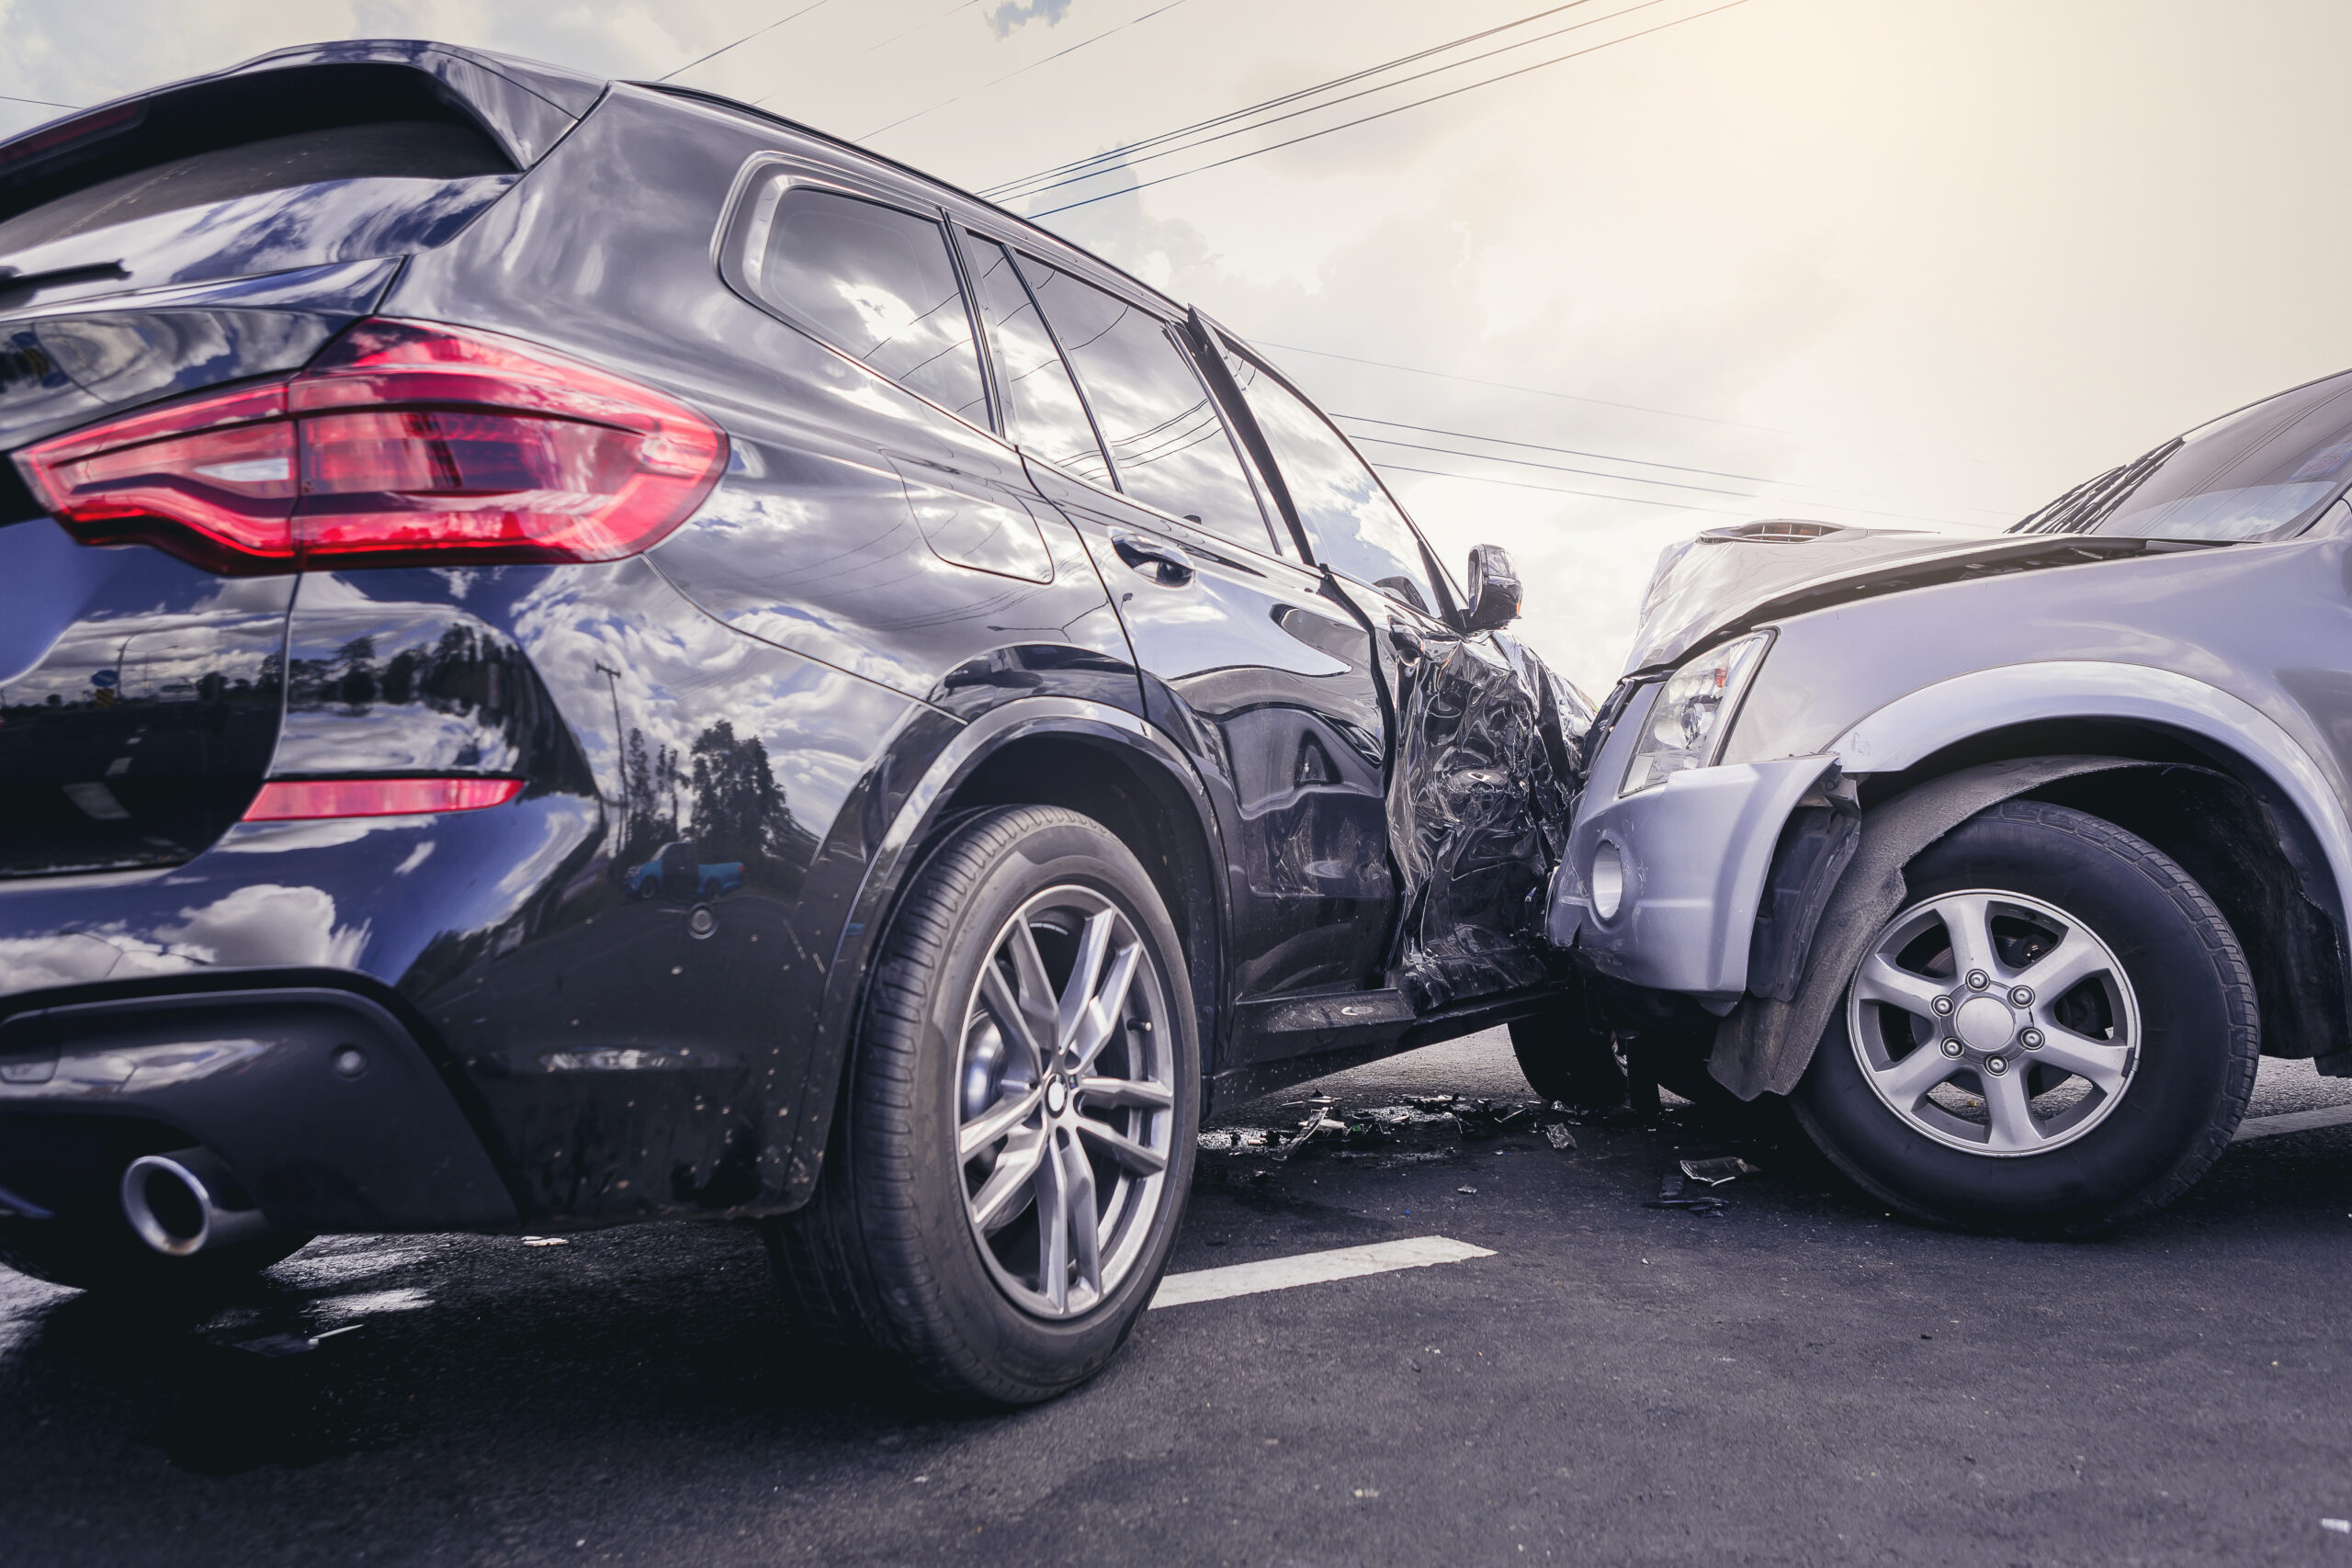 Will Health Insurance Cover My Medical Expenses Following a Car Crash?